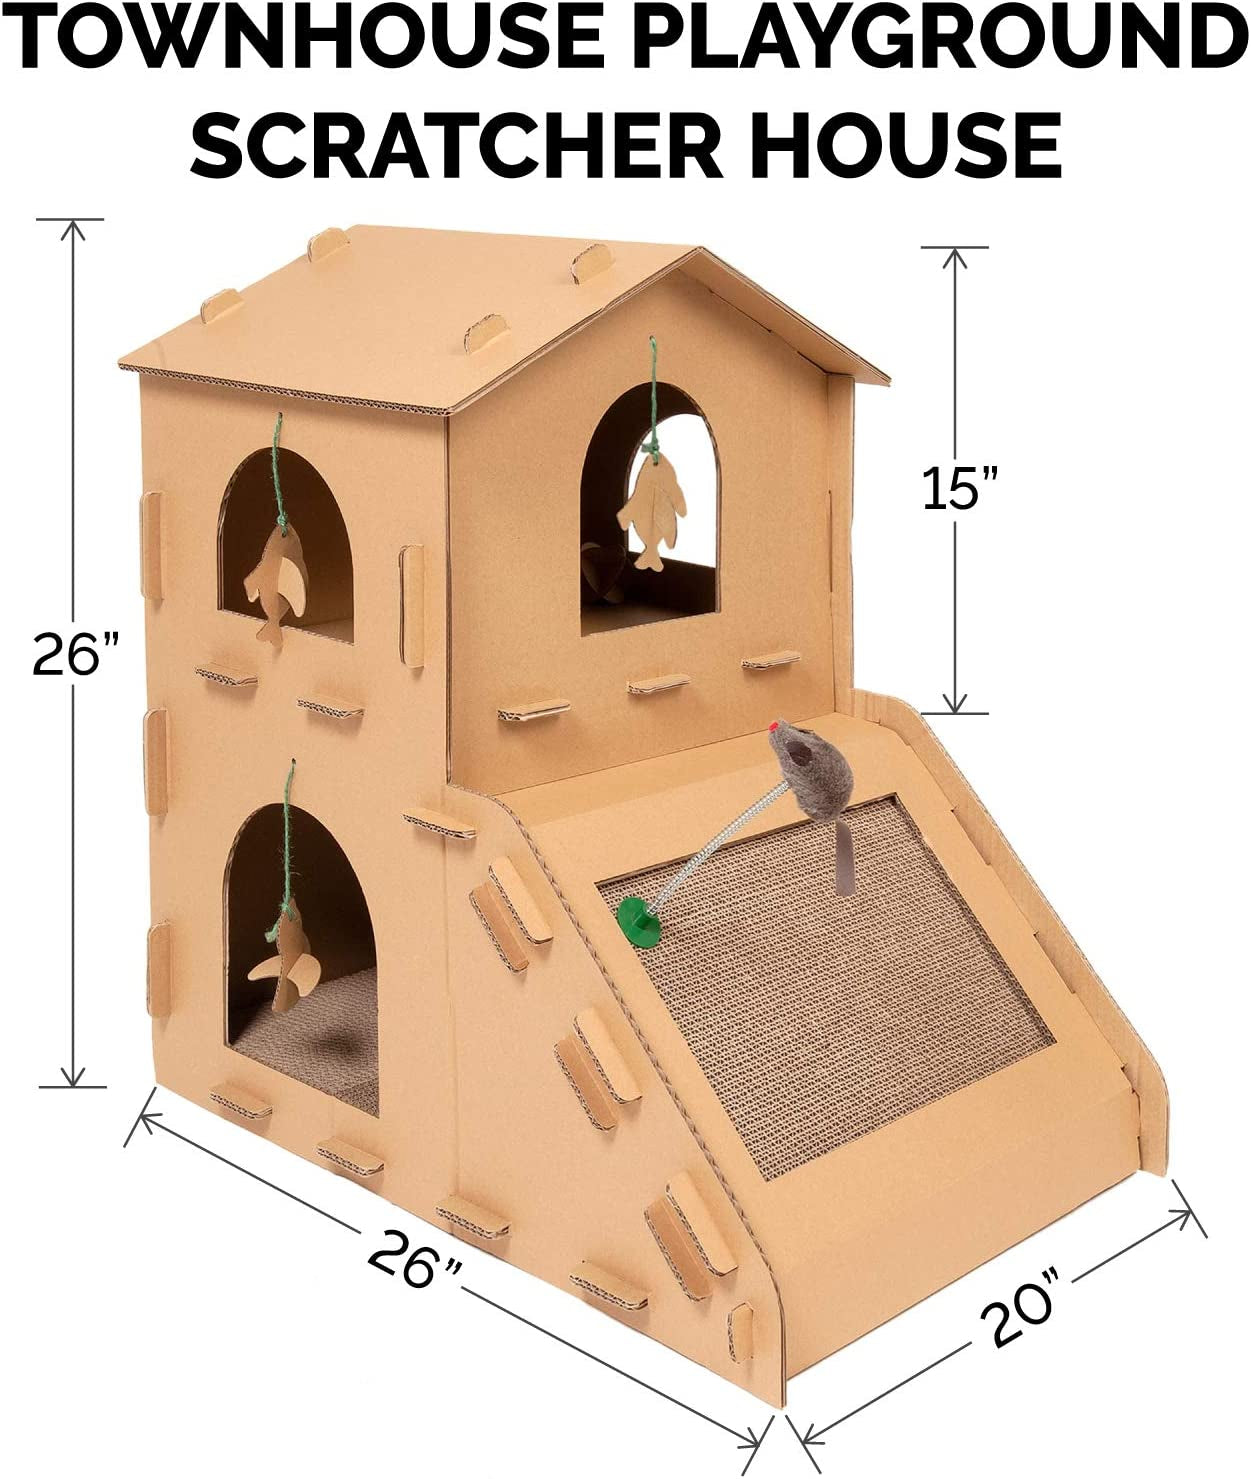 Multi-Level Cardboard Cat House W/ Catnip for Indoor Cats, Ft. Scratching Pads & Toys - Townhouse Corrugated Cat Scratcher Hideout - Cardboard Brown, One Size